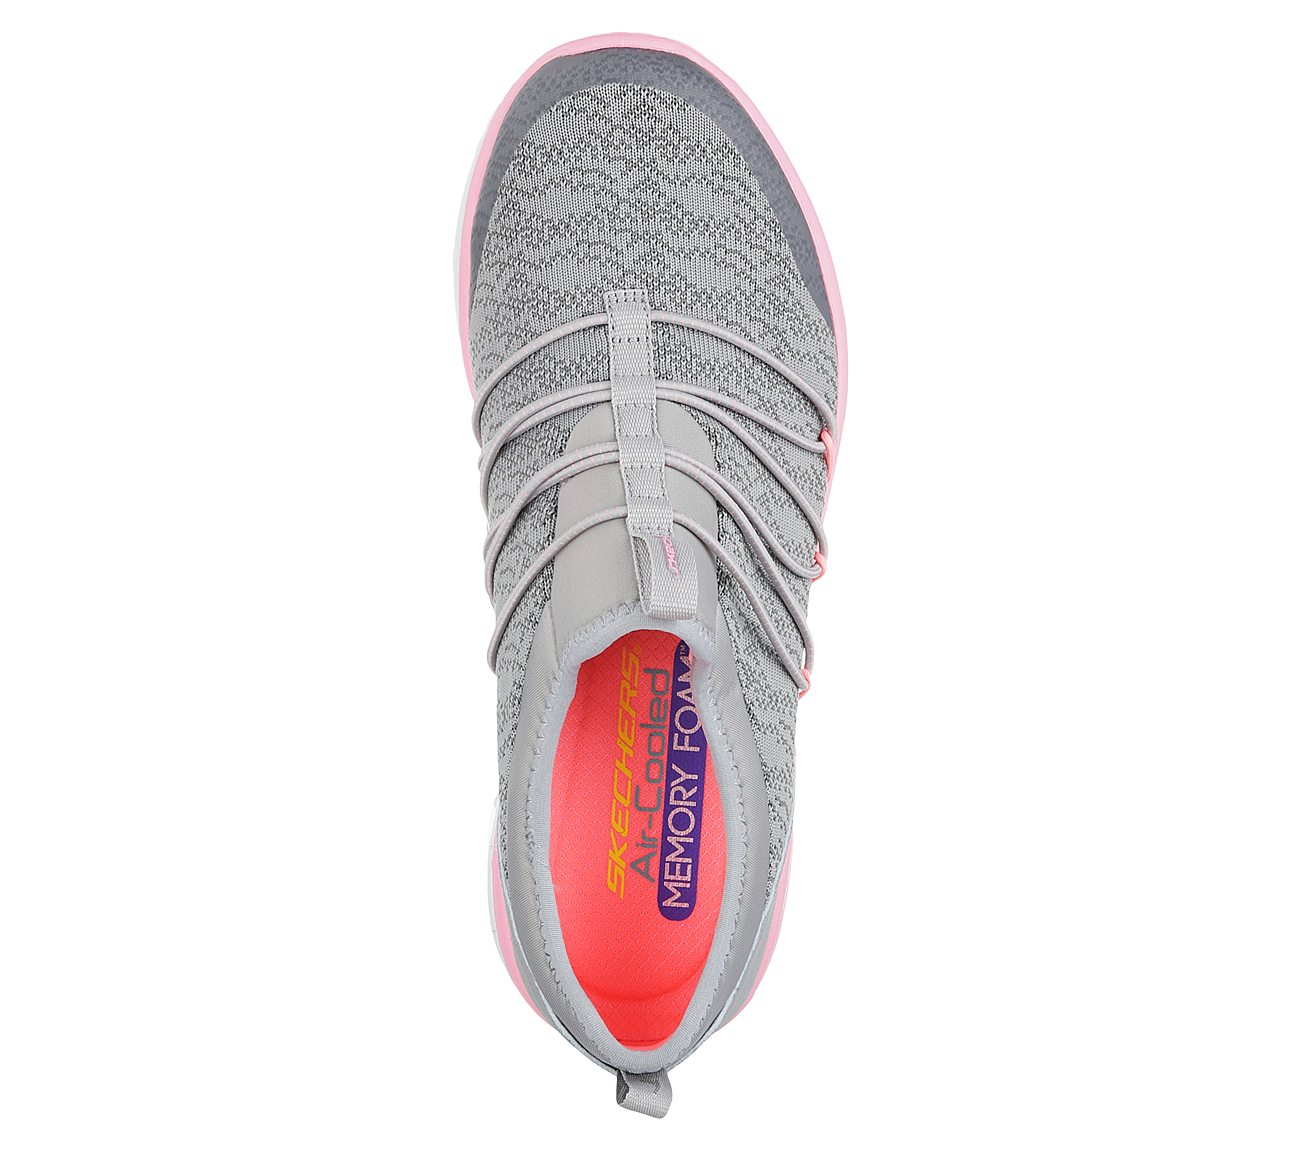 skechers synergy gris